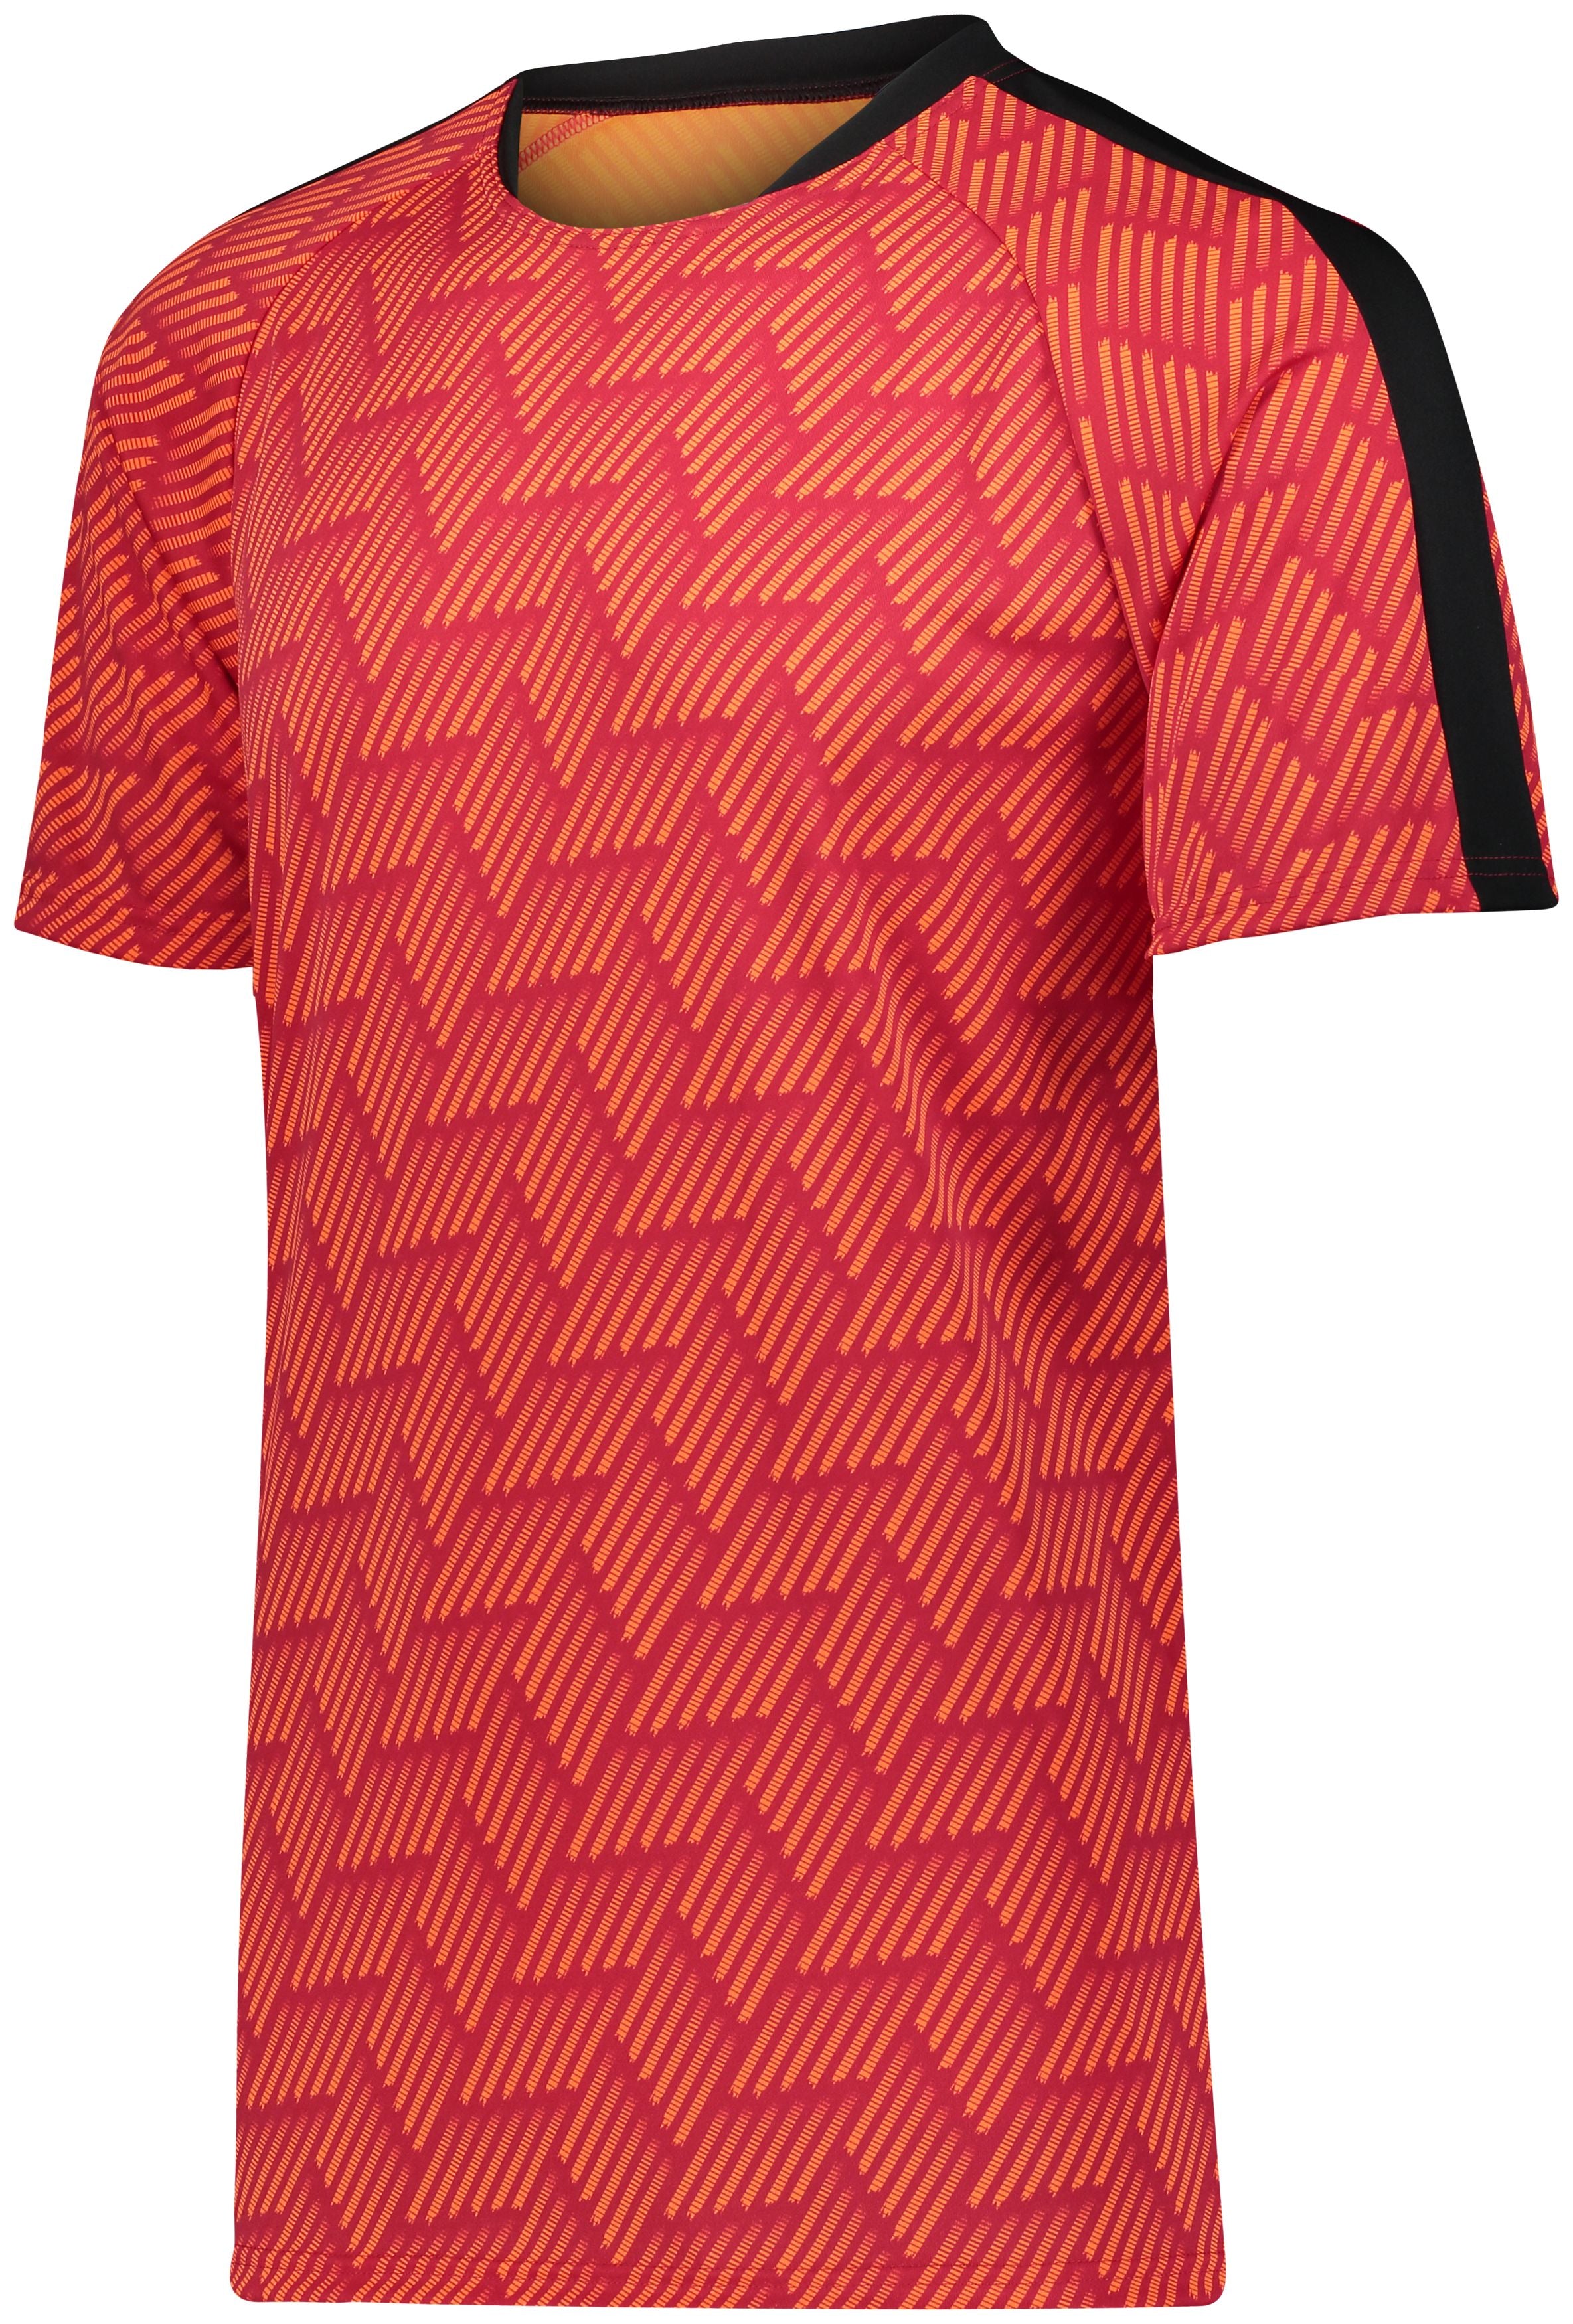 High 5 Youth Hypervolt Jersey in Scarlet Print/Black  -Part of the Youth, Youth-Jersey, High5-Products, Soccer, Shirts, All-Sports-1 product lines at KanaleyCreations.com